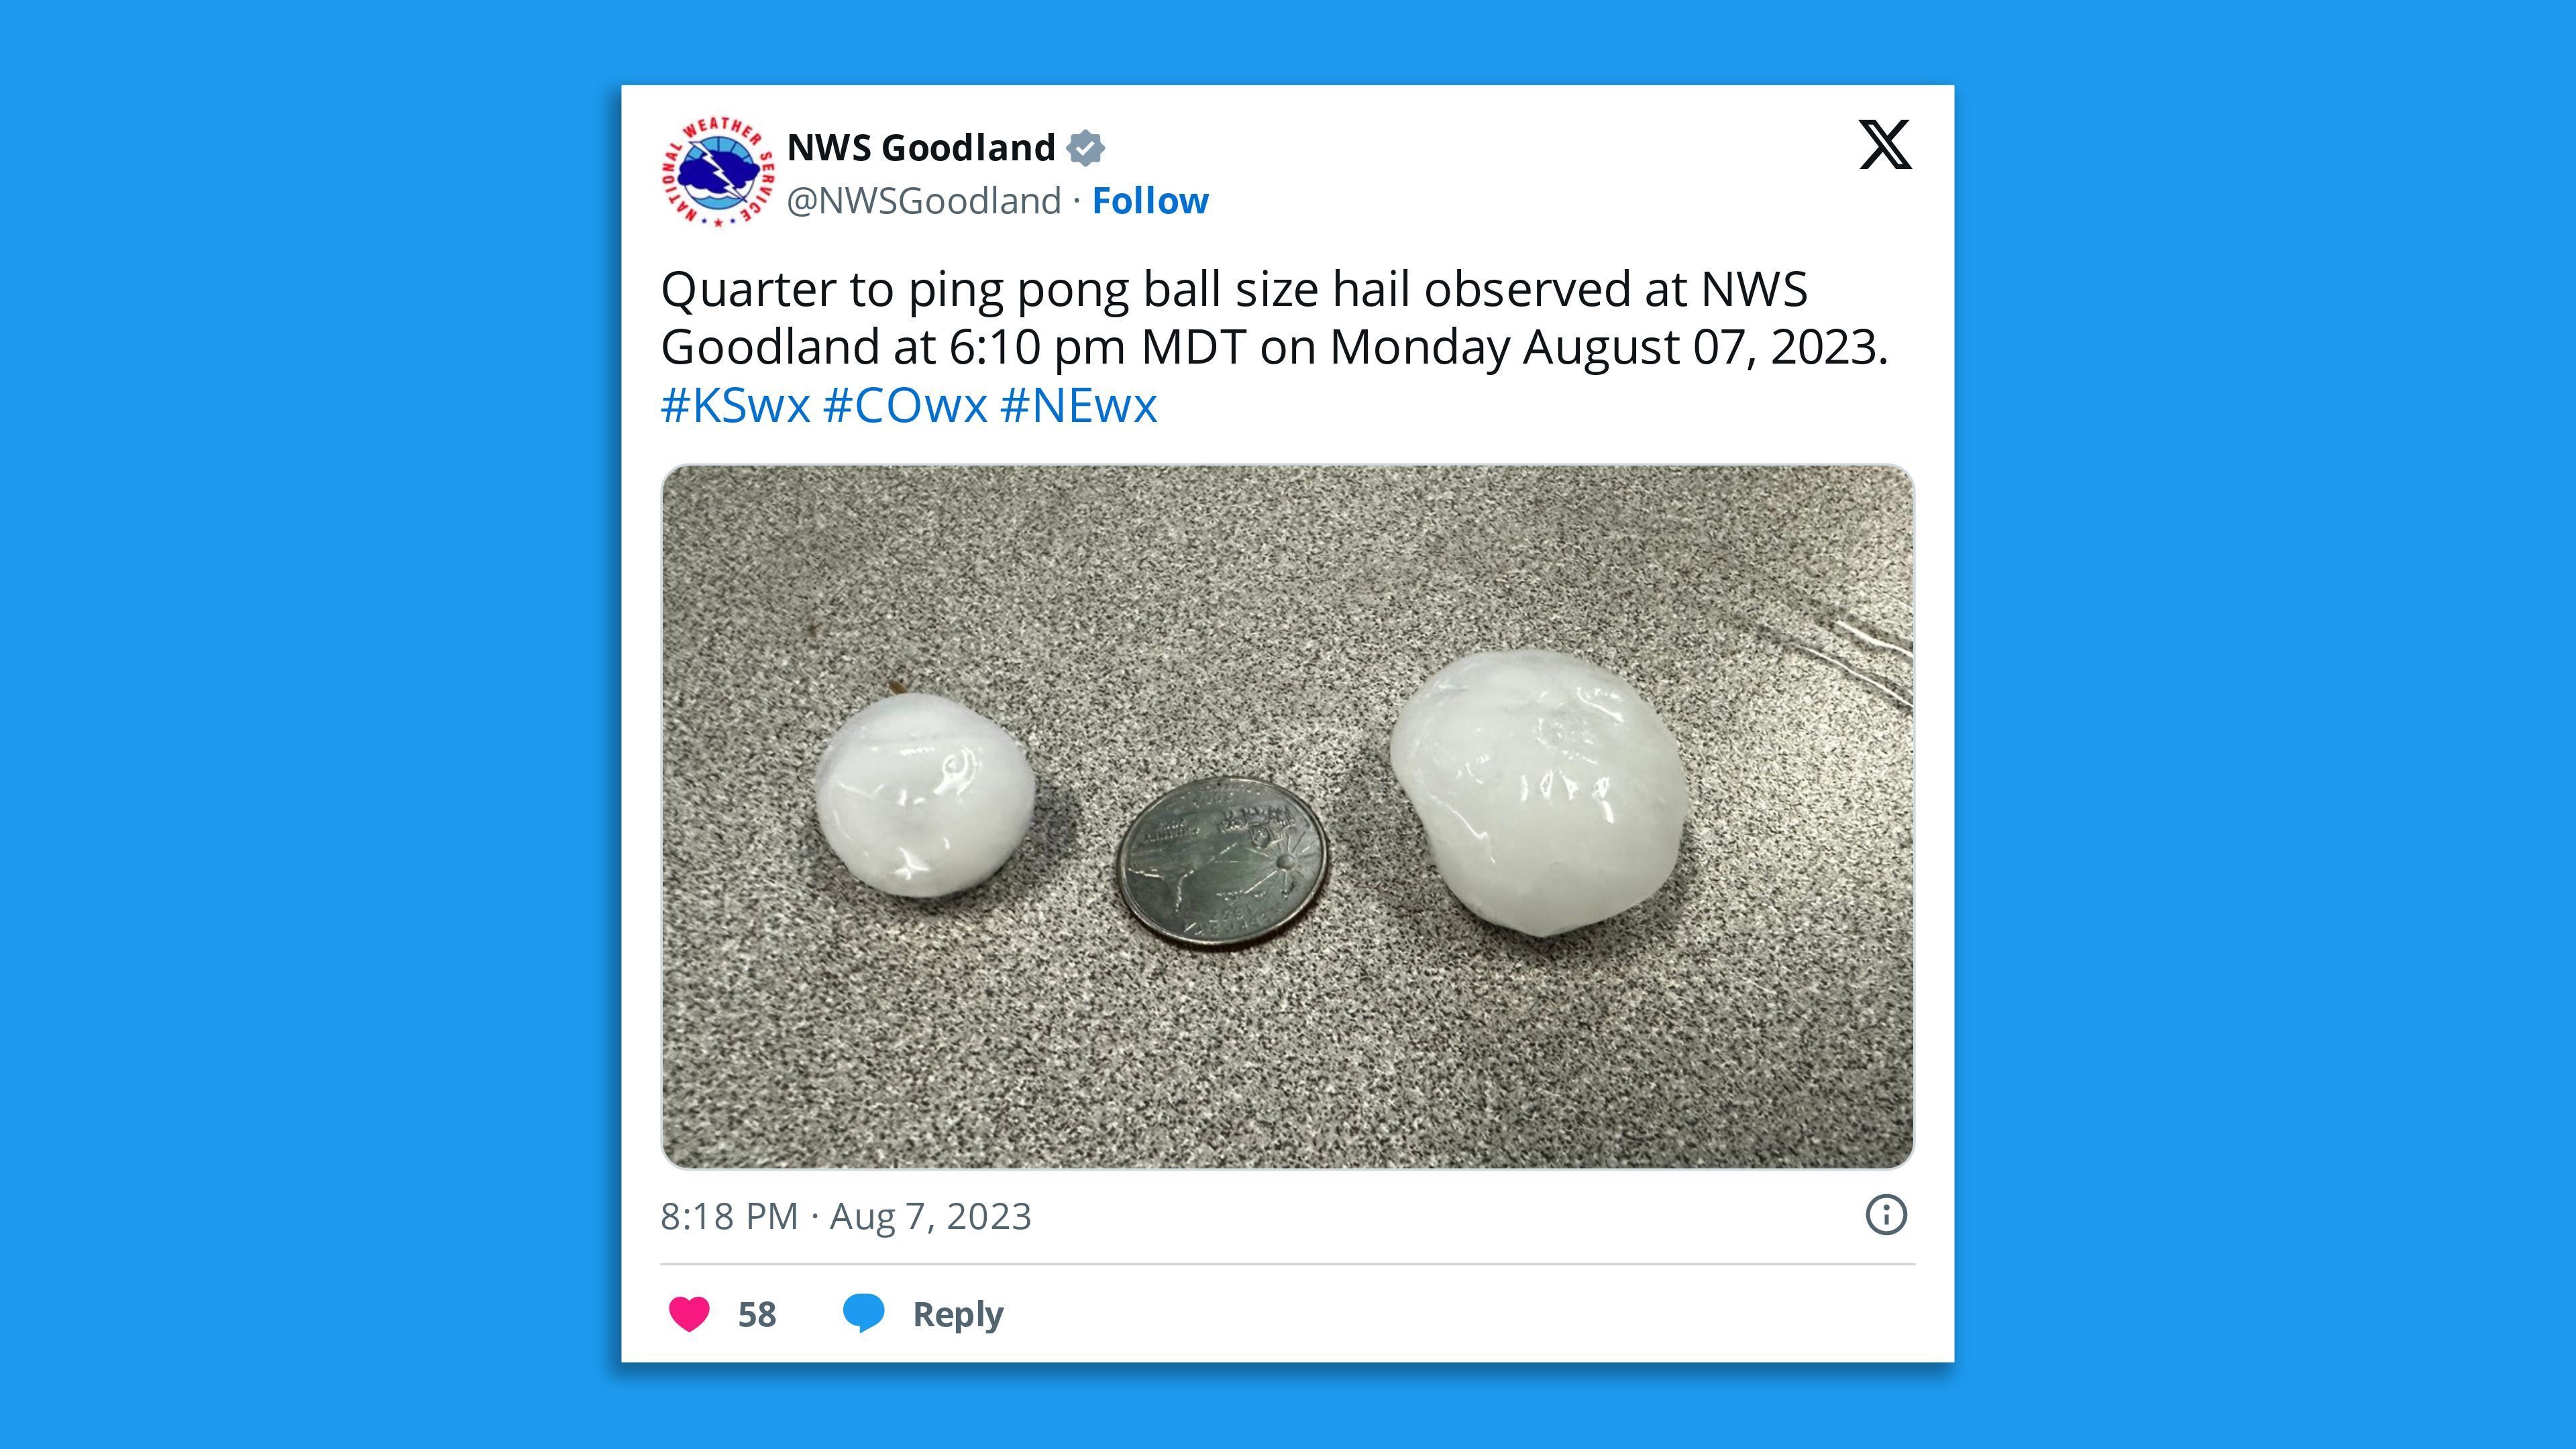 A screenshot of an NWS Goodland tweet, saying: "Quarter to ping pong ball size hail observed at NWS Goodland at 6:10 pm MDT on Monday August 07, 2023. #KSwx #COwx #NEwx"